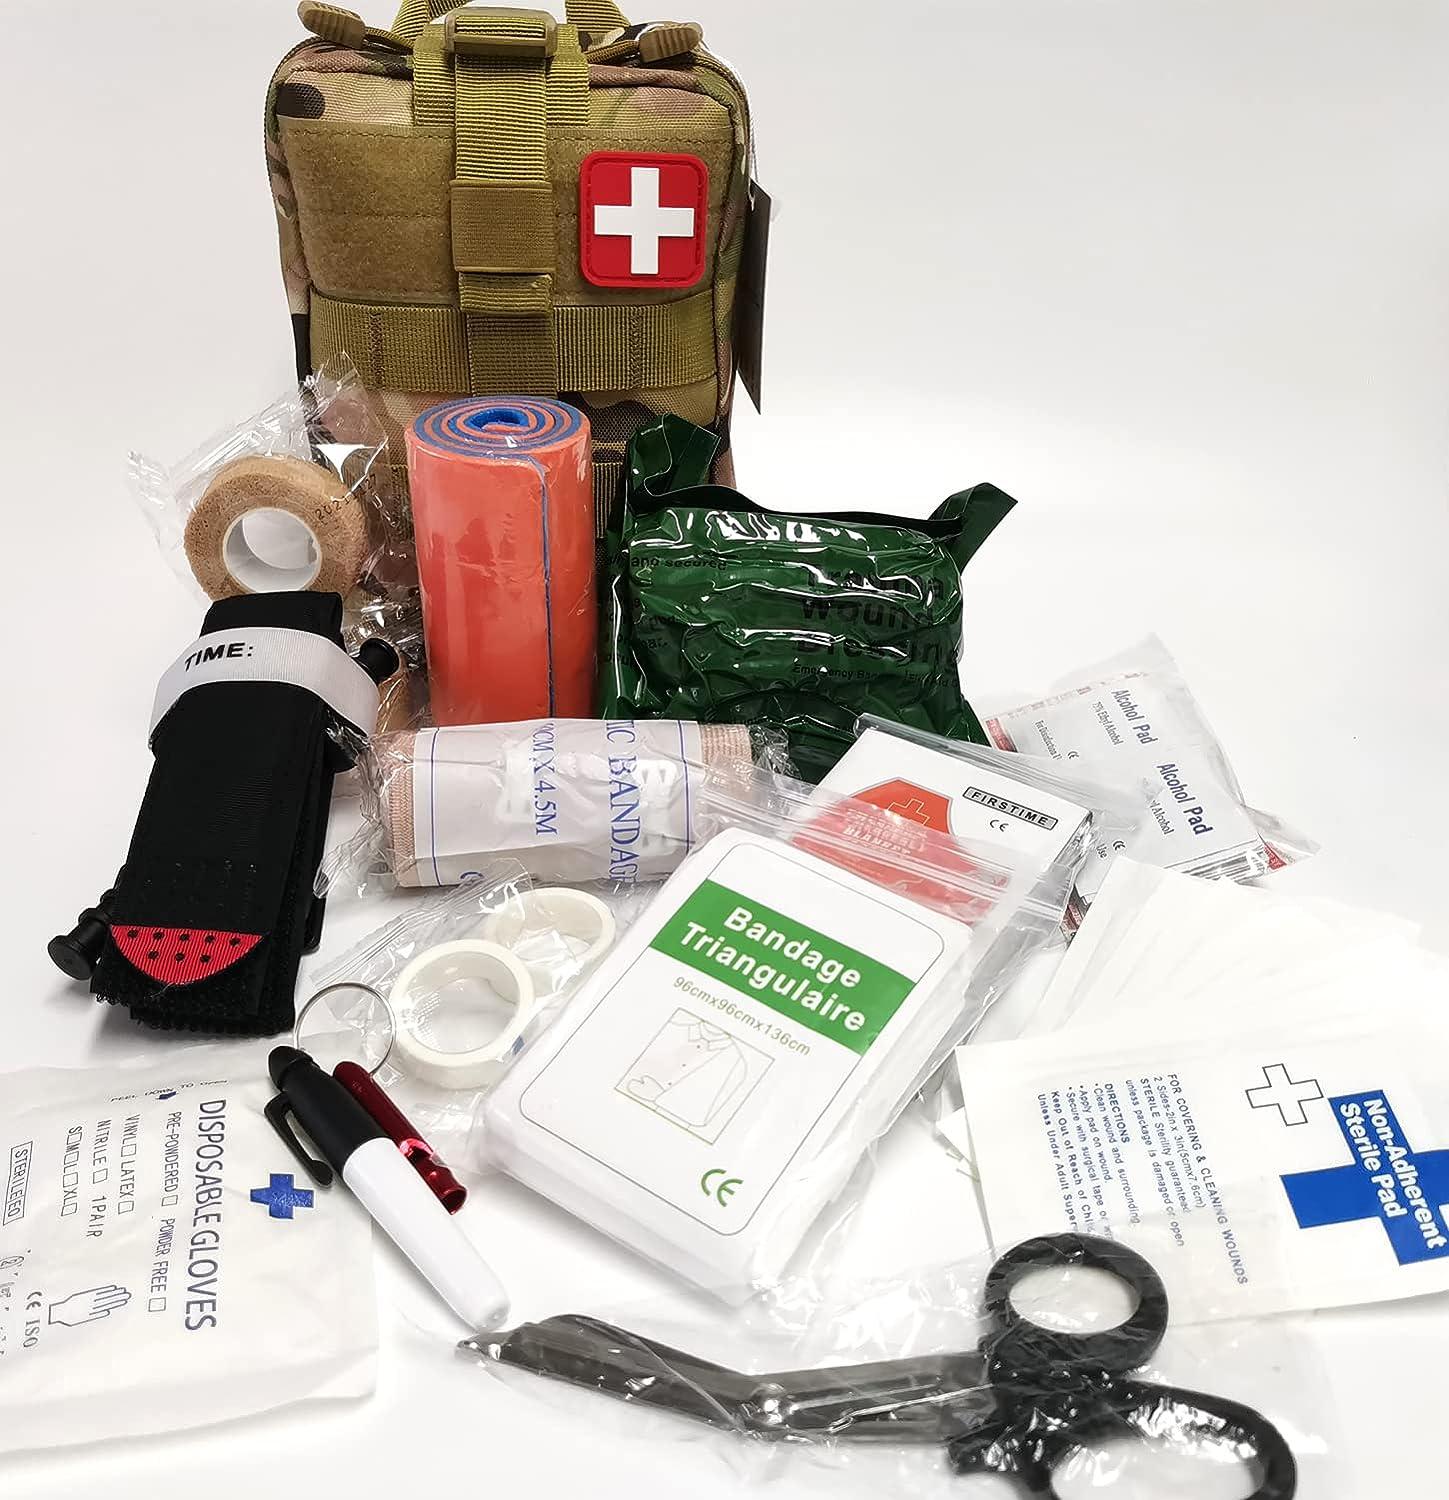 IFAK Kit, Trauma Kit Military Medical First Aid Kits with Tourniquet,  Emergency Survival Bug Out Bag for Camping Gear Supplies Hiking (Camouflage)